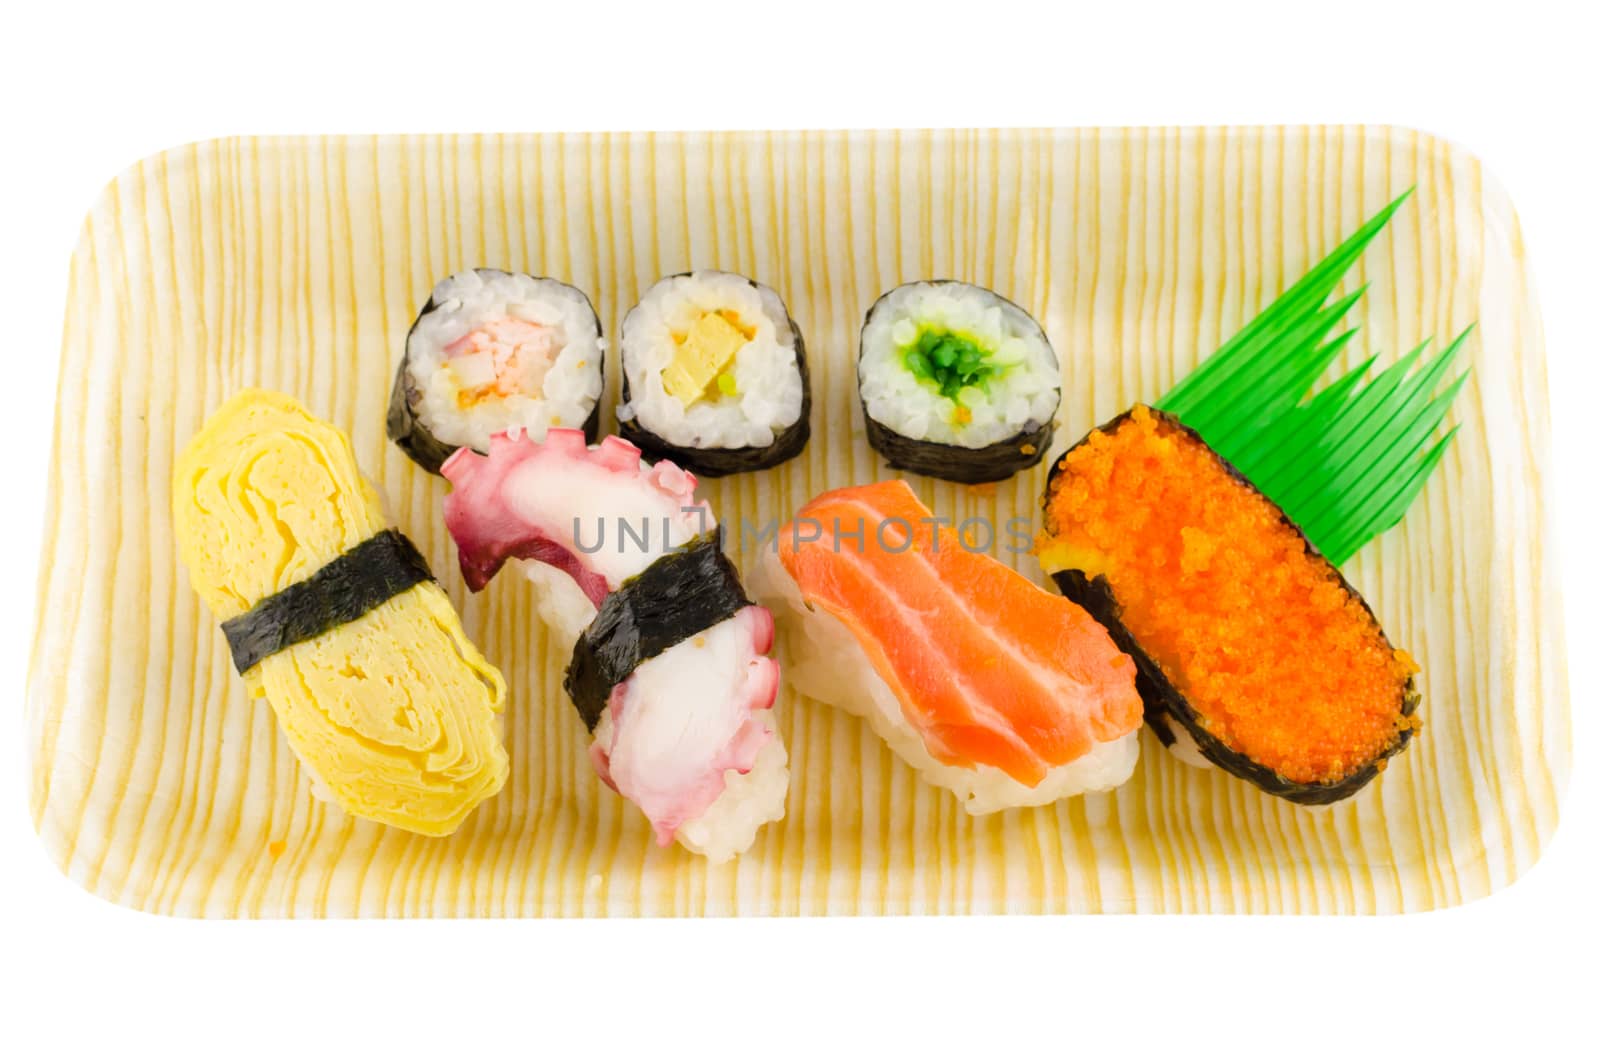 Sushi is a traditional Japanese food.